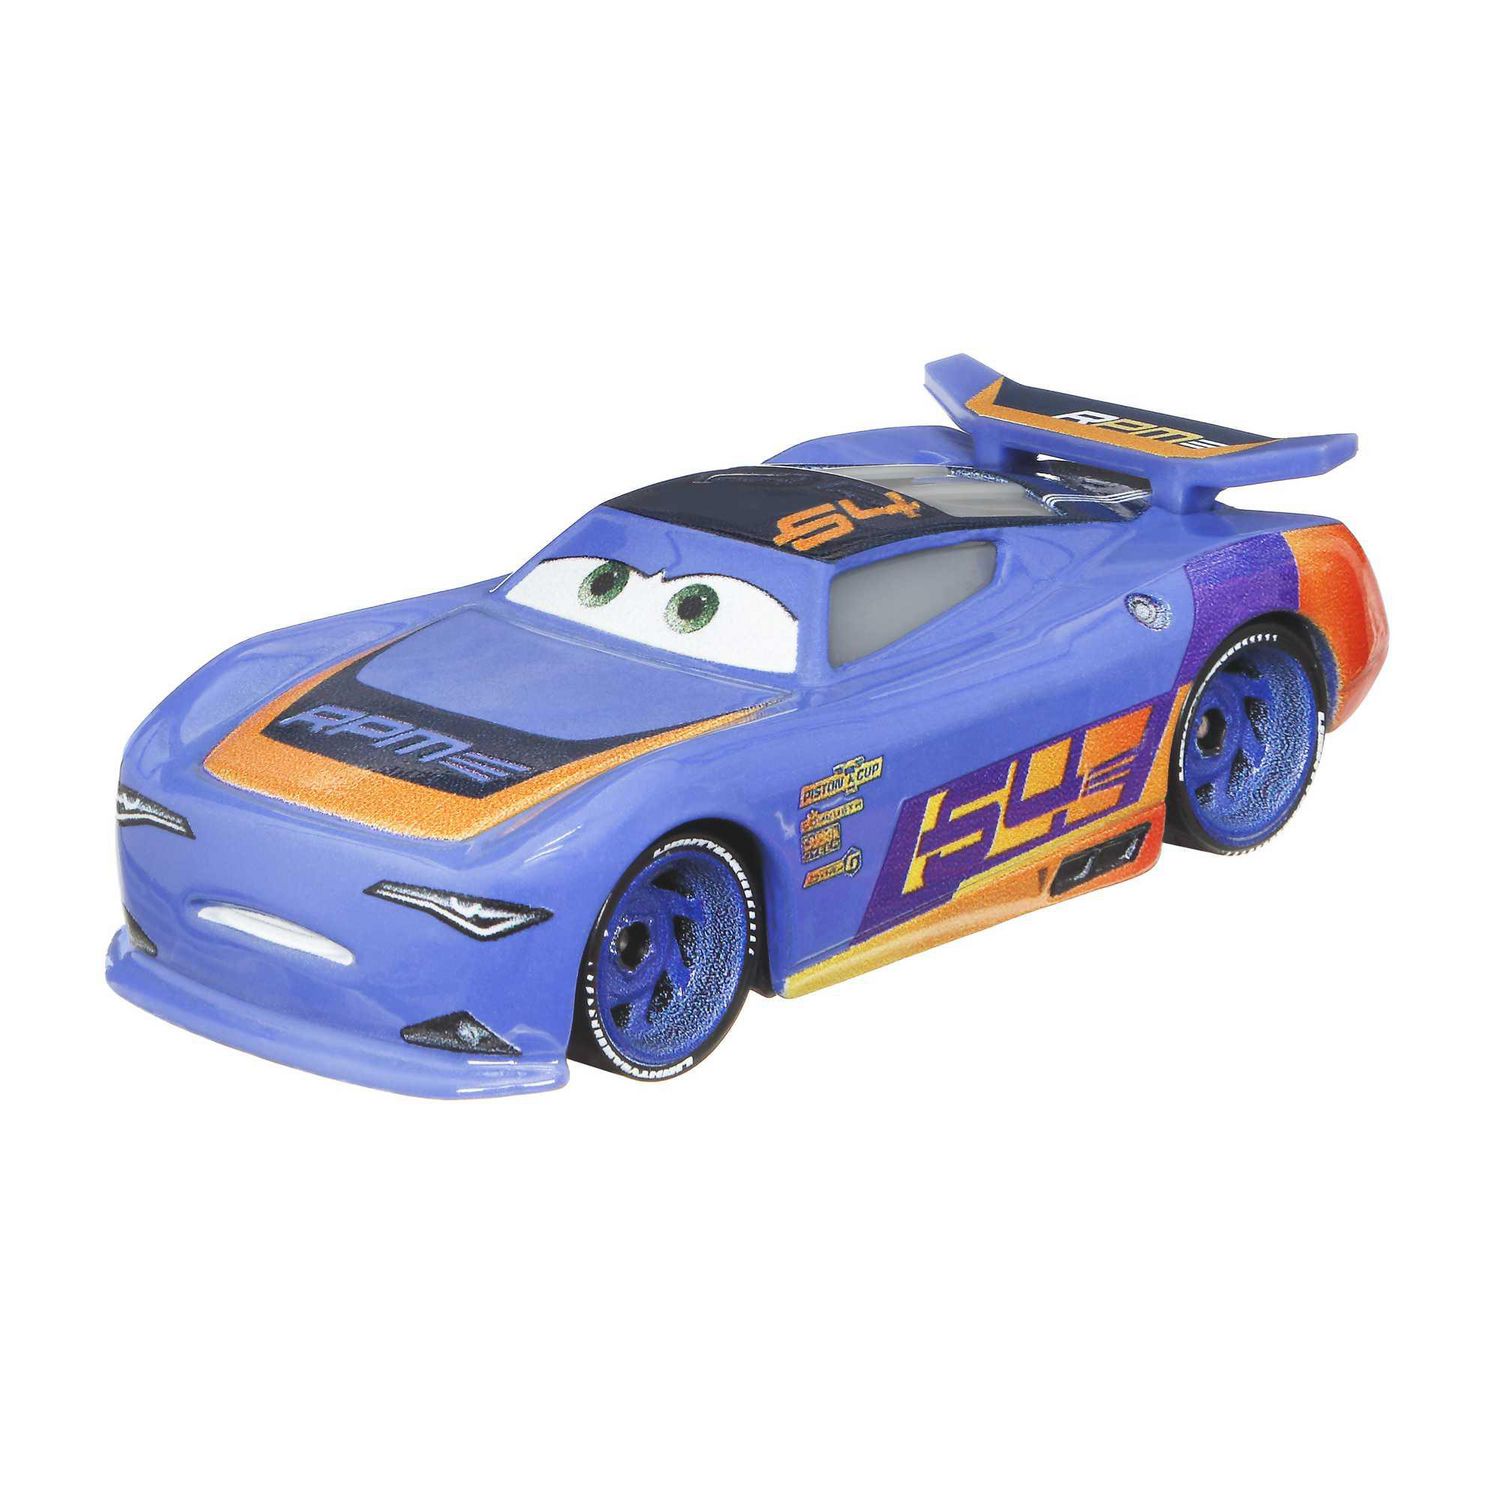 Disney and Pixar Cars 2-Pack Collection, 1:55 Scale Die-Cast